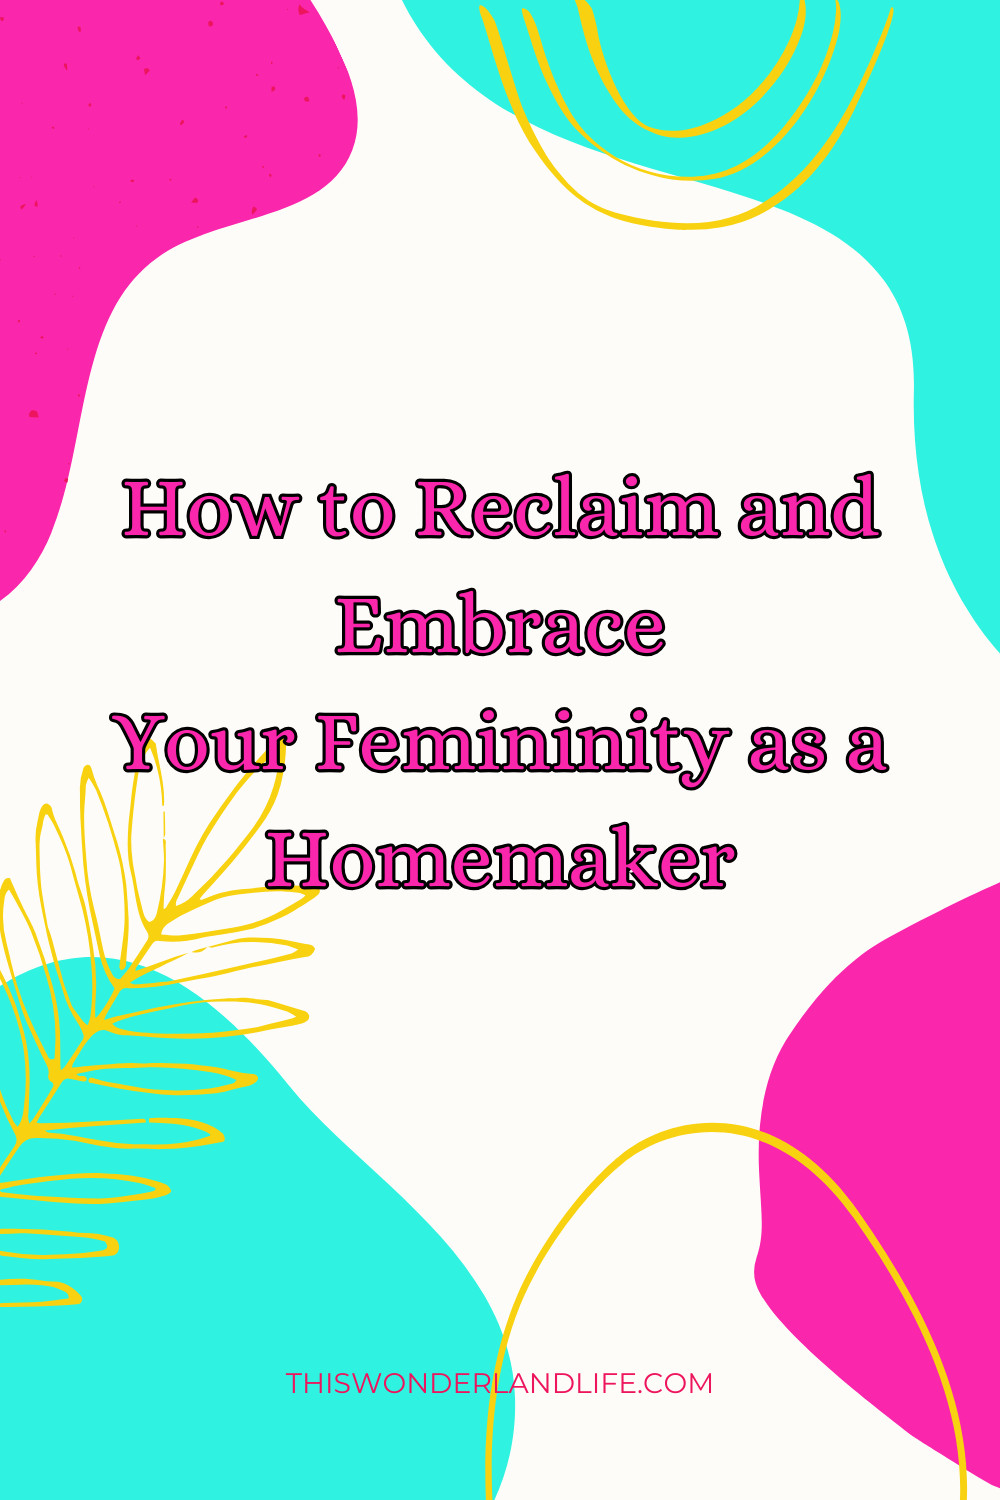 How to Reclaim and Embrace Your Femininity as a Homemaker